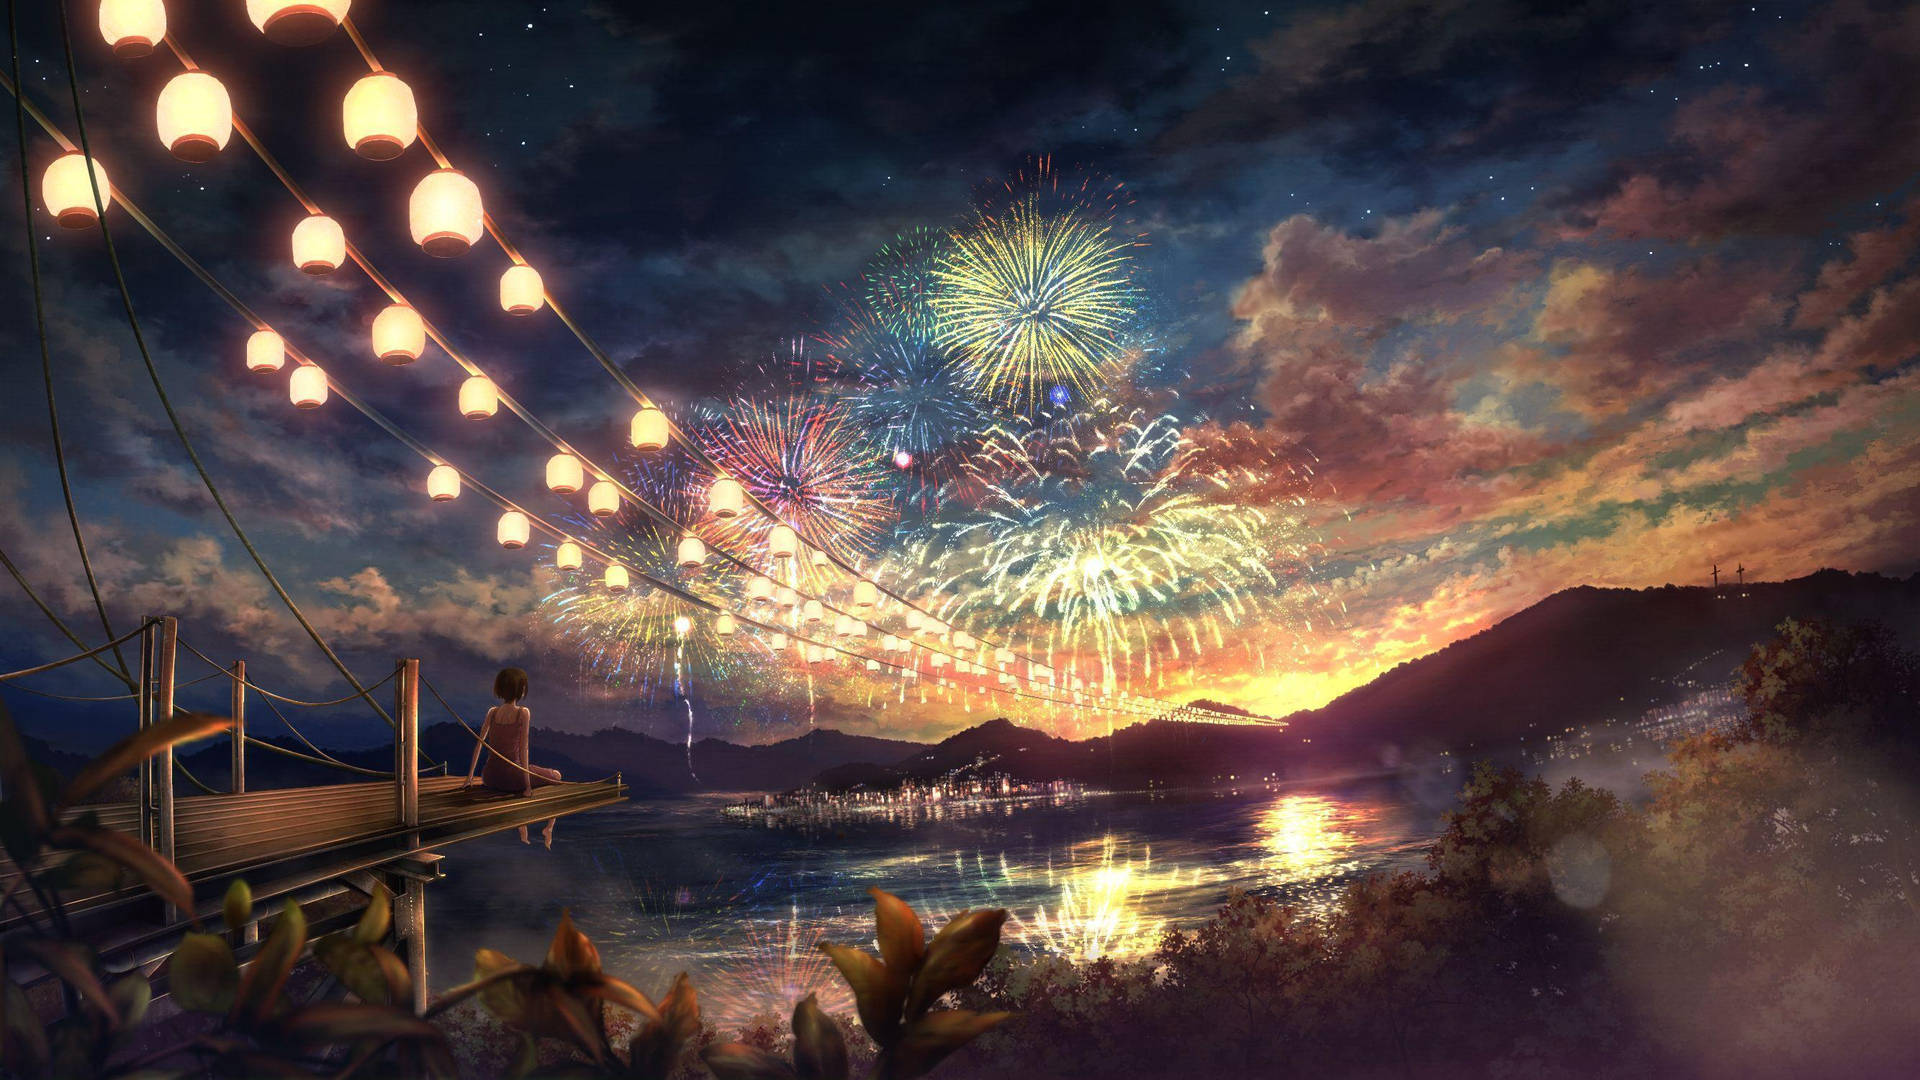 Wallpaper Anime Landscape, Anime, Landscape Painting, Painting, Art,  Background - Download Free Image